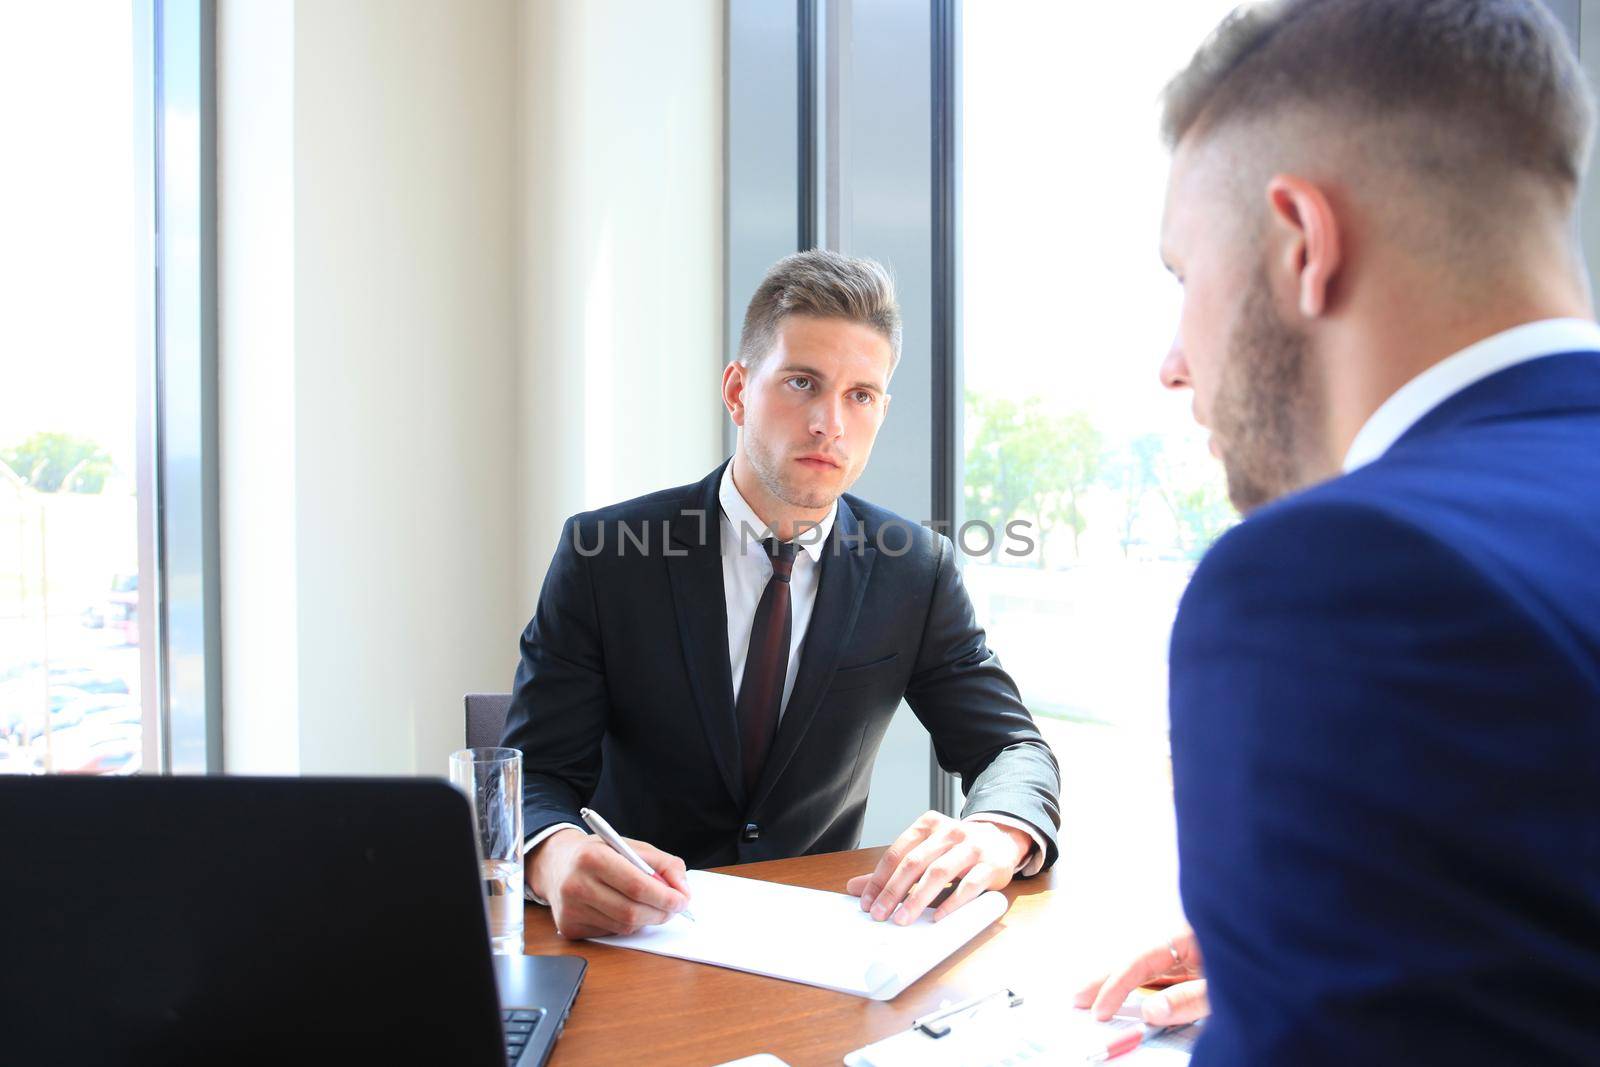 Recruiter checking the candidate during job interview by tsyhun